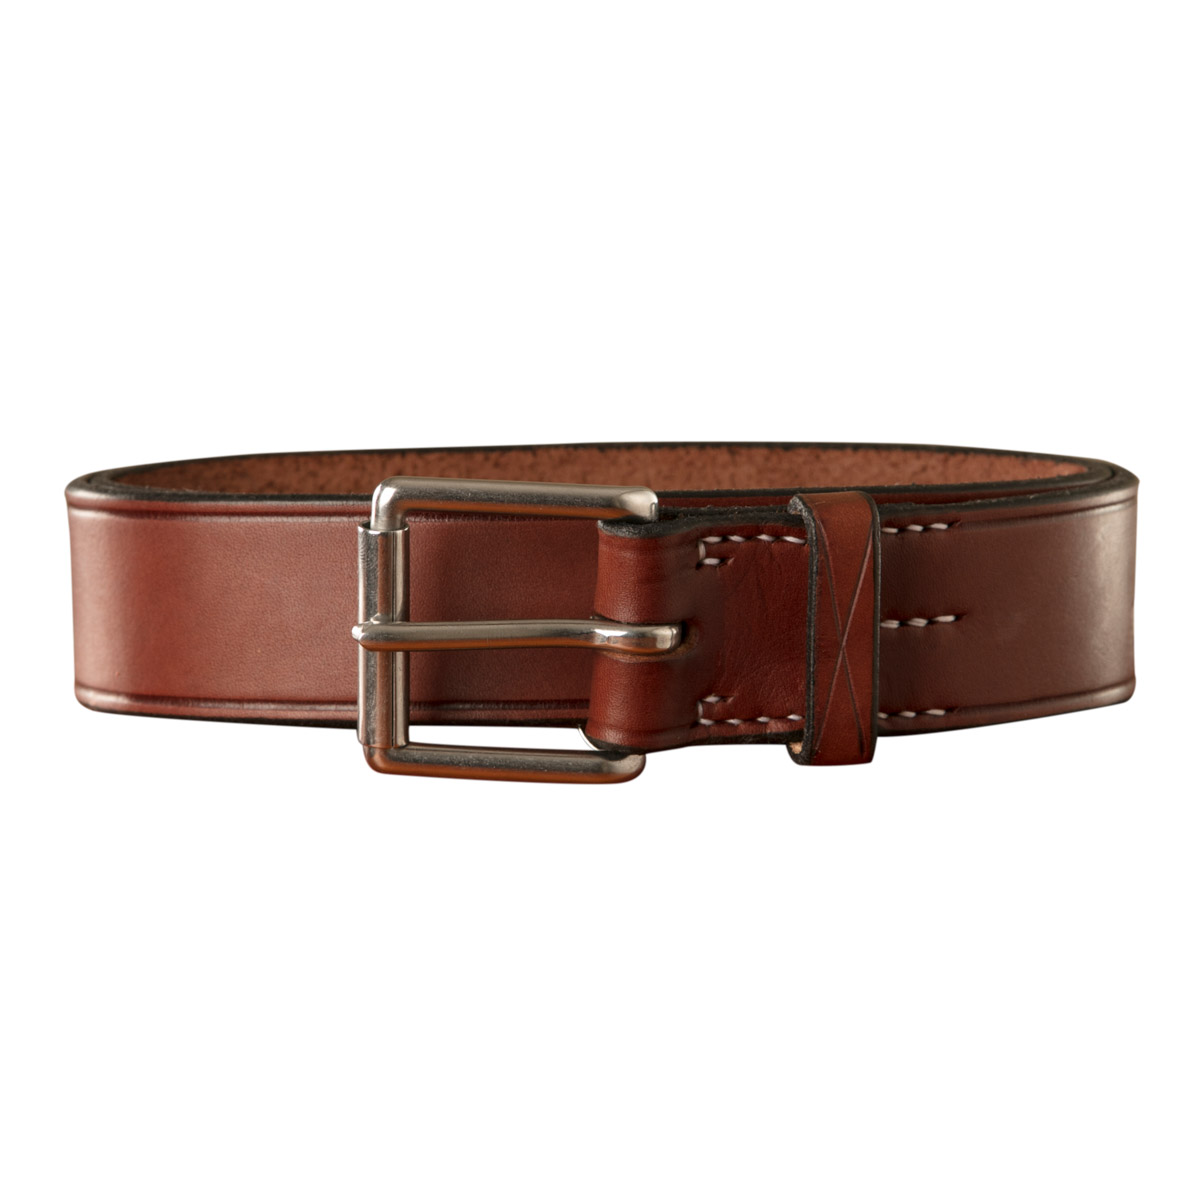 Stockmans Belt, Solid Leather, with Stainless Steel Roller Buckle - Plain 1